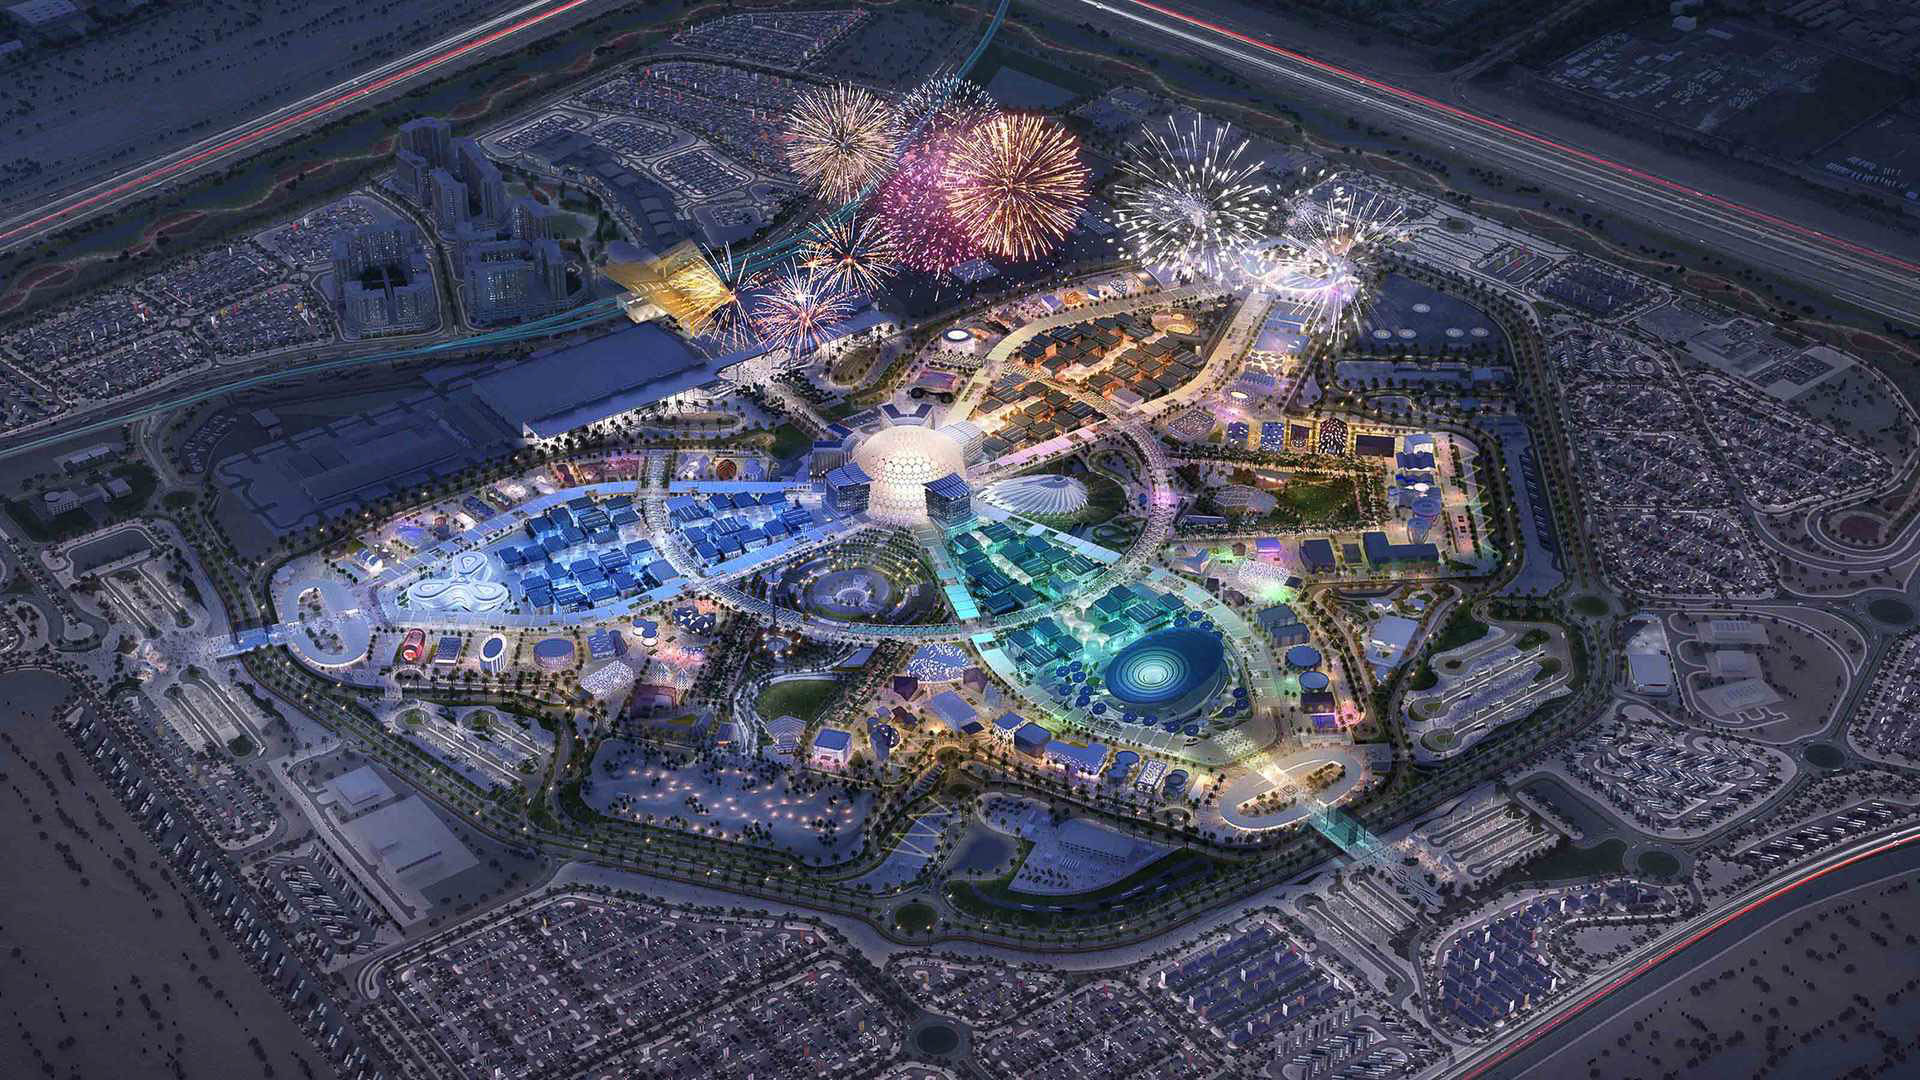 Featured image for “Expo 2020”